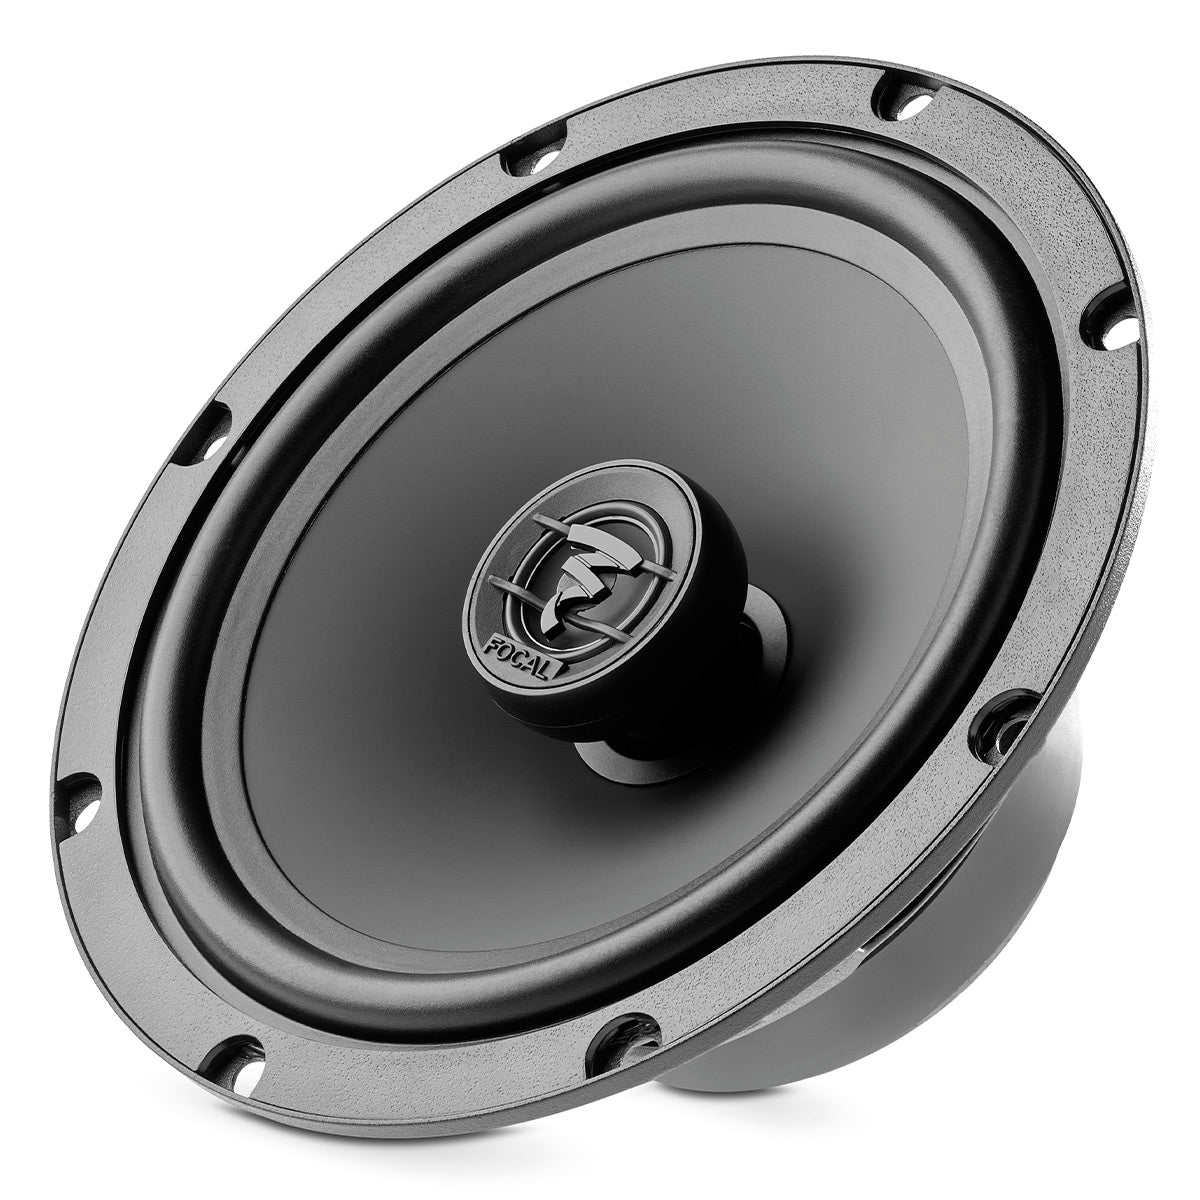 Focal ACX 165 6.5" 2-Way Coaxial Kit